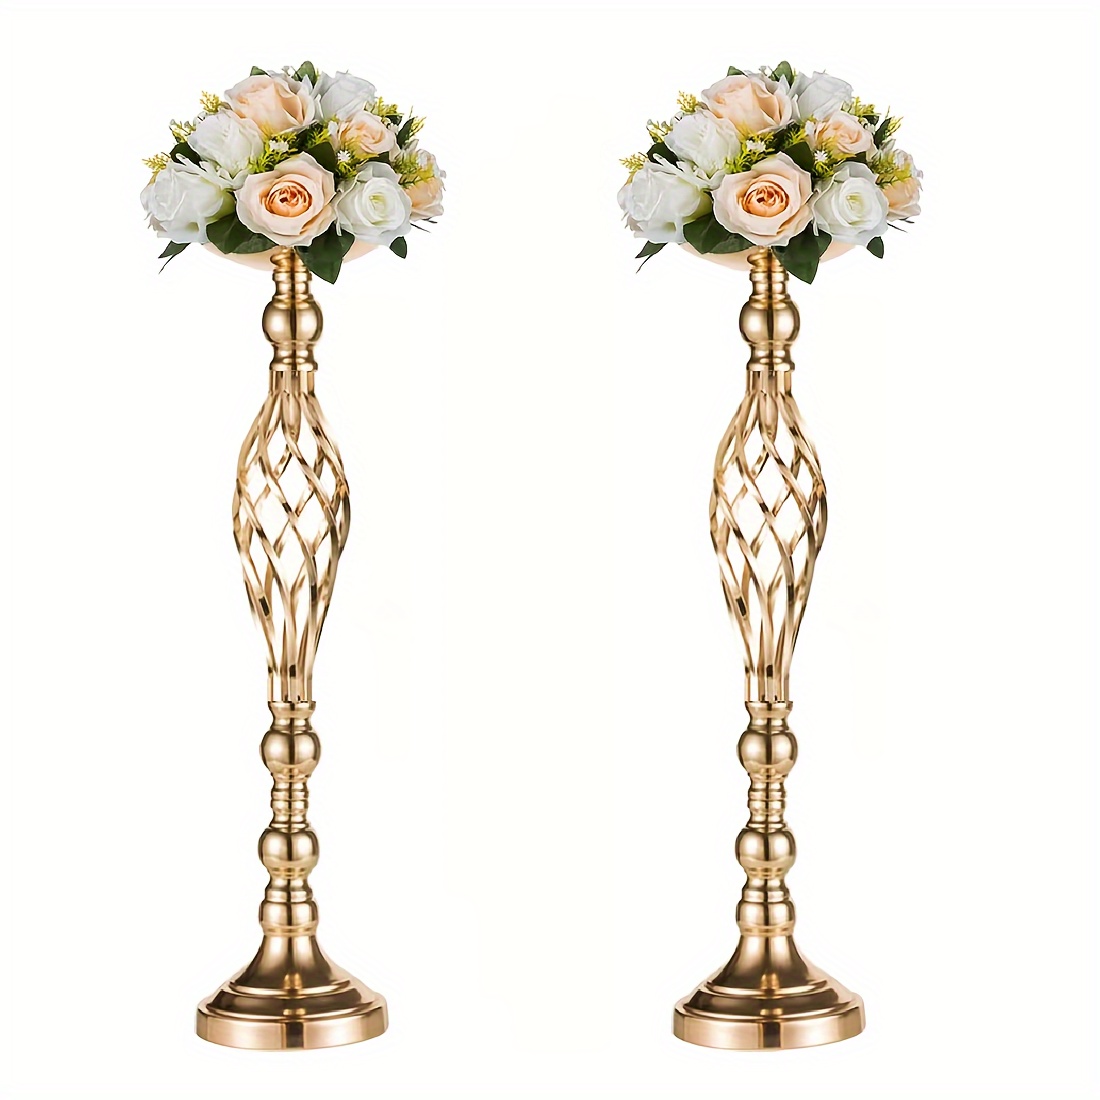 

2pcs, Metal Flower Vase, Wedding Party Flowers Centerpieces For Table, Tall Candle Holder For Pillar Candle, Restaurant Hotel Decorations